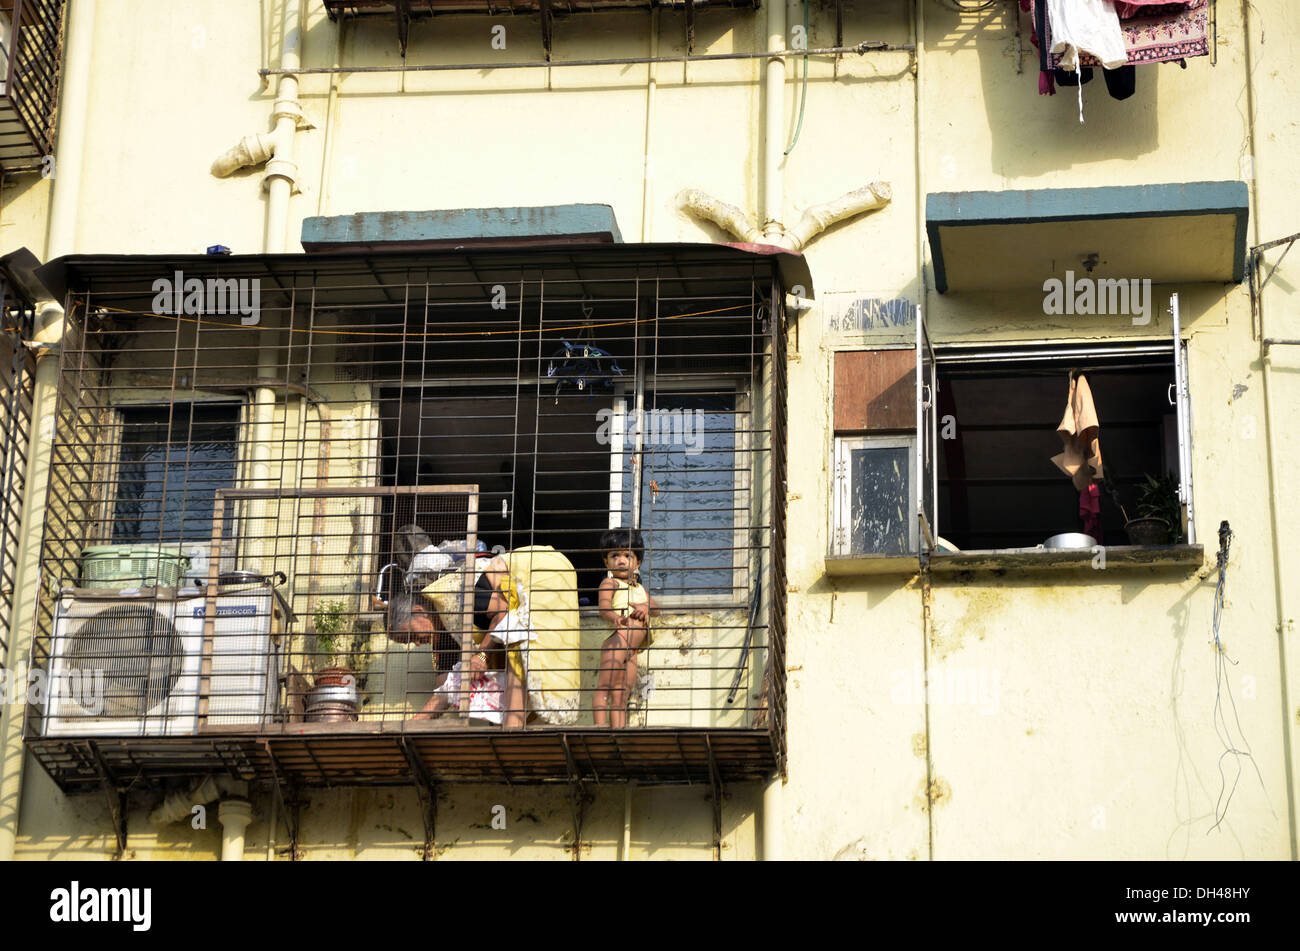 Old lady and girl standing in extended window grill balcony of flat Mumbai Maharashtra India Stock Photo